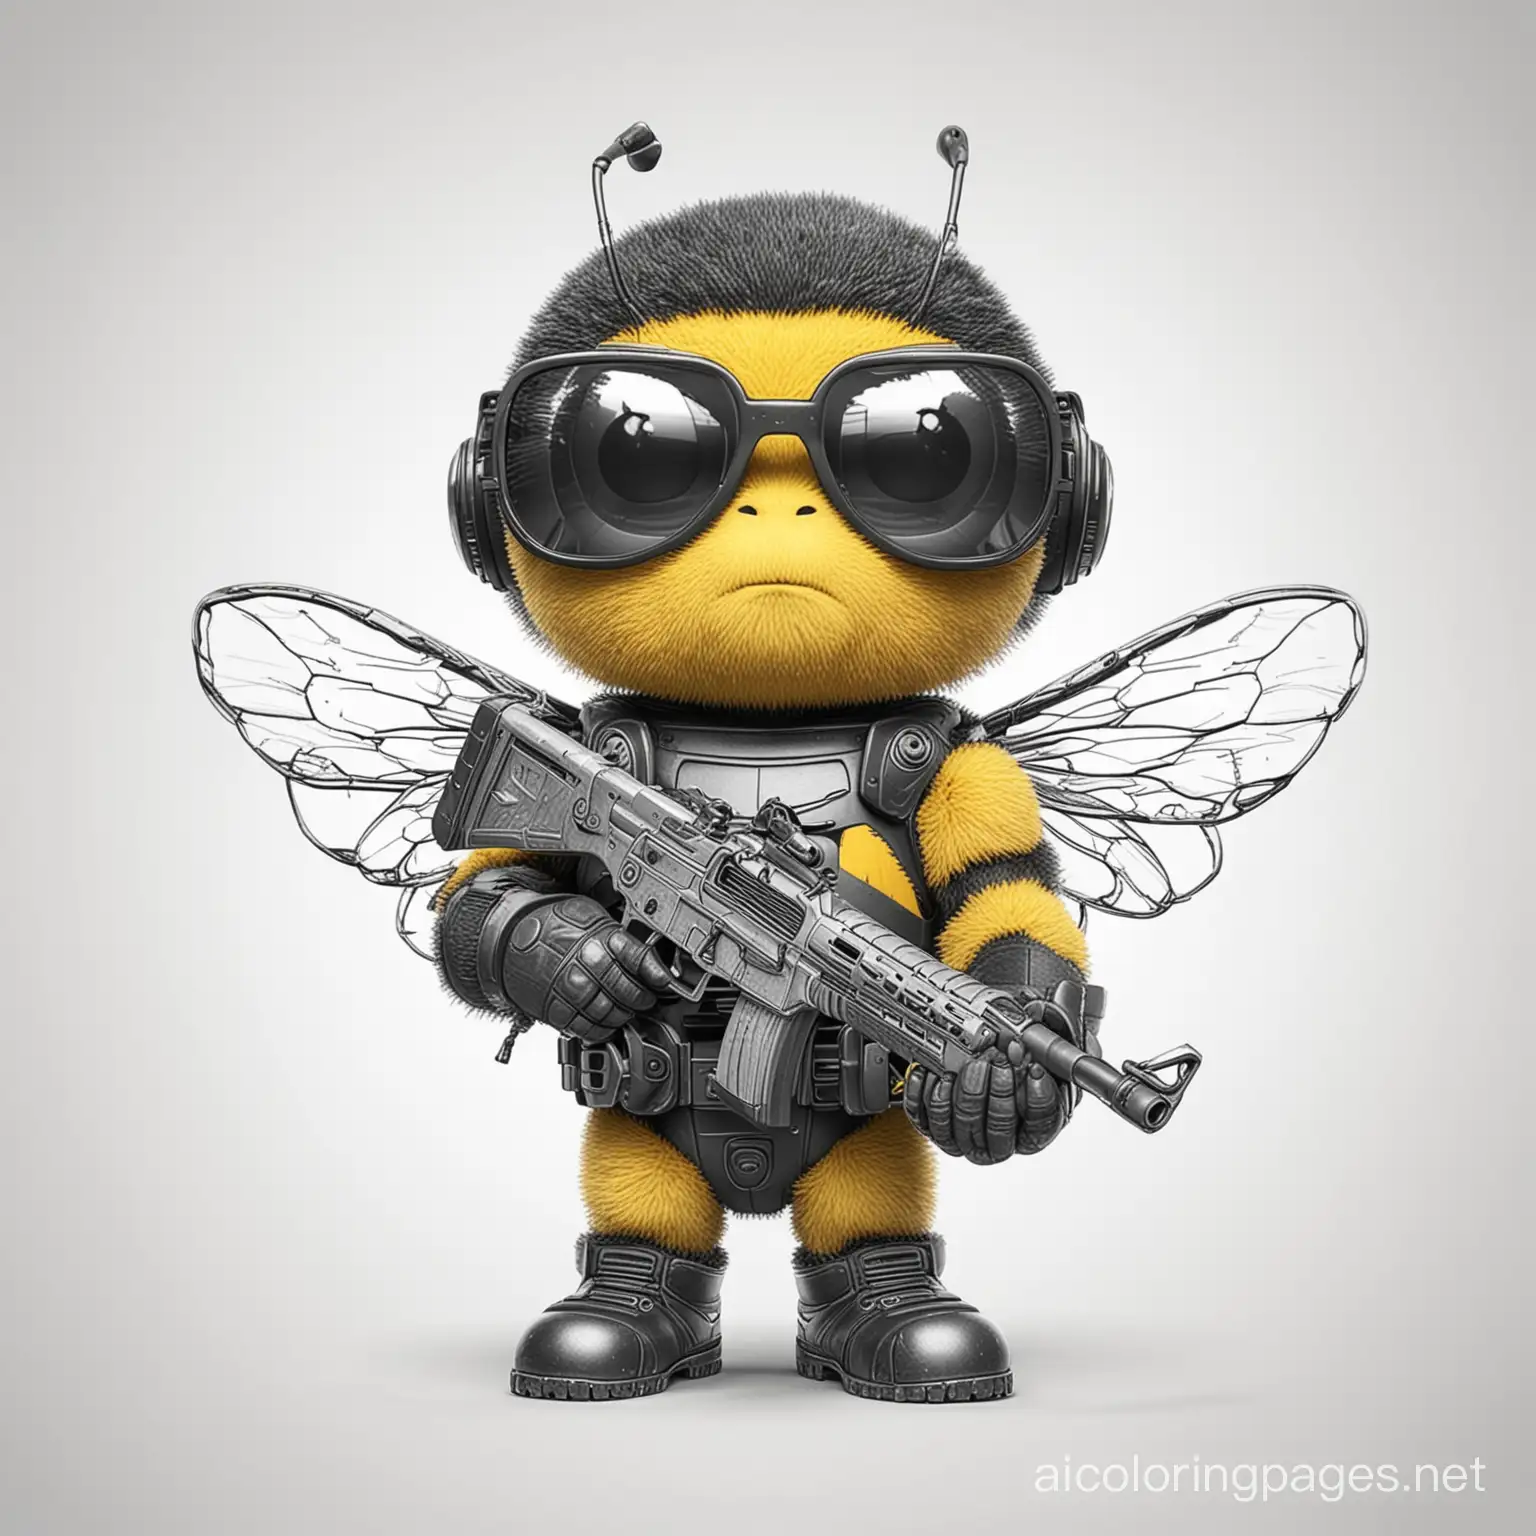  bumble bee with sunglasses and a shotgun, Coloring Page, black and white, line art, white background, Simplicity, Ample White Space. The background of the coloring page is plain white to make it easy for young children to color within the lines. The outlines of all the subjects are easy to distinguish, making it simple for kids to color without too much difficulty